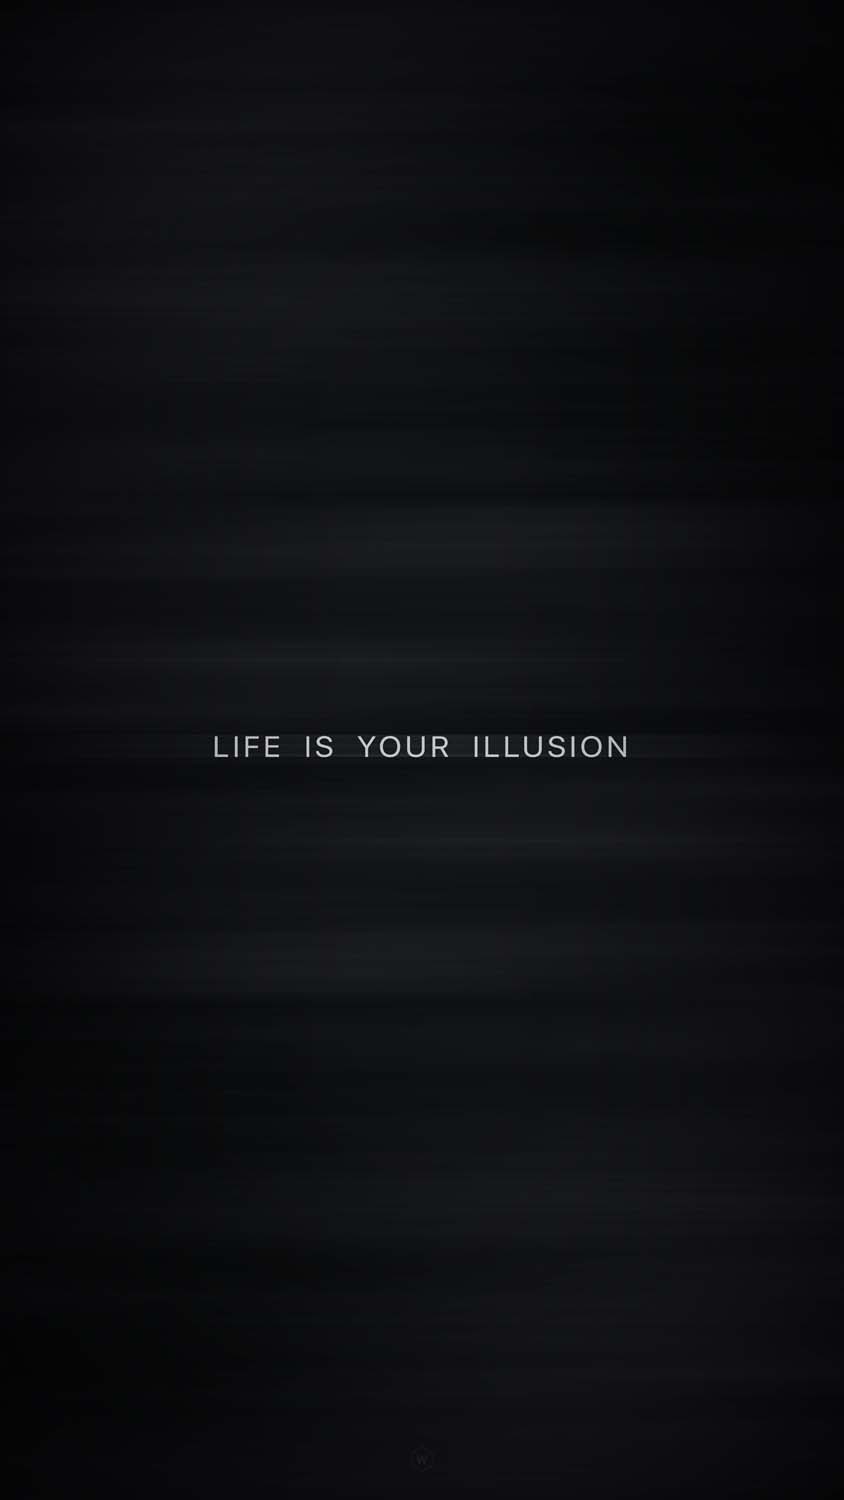 Life is illusion iPhone Wallpaper HD